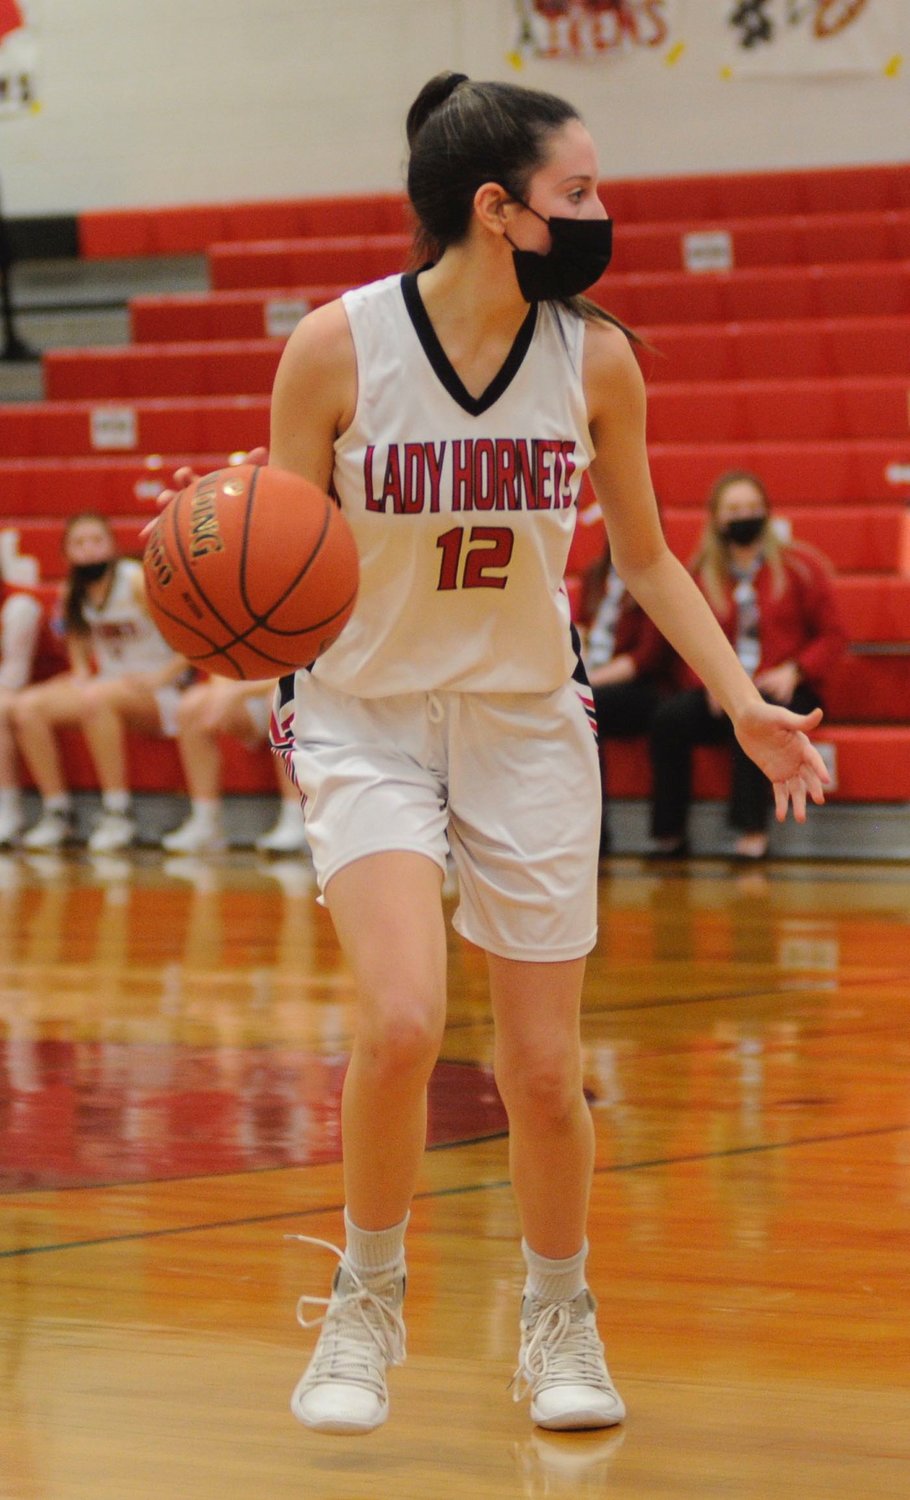 Honesdale’s senior co-captain Misa Land has been playing the game of hoops since her freshman year at the “Home of the Hornets.”